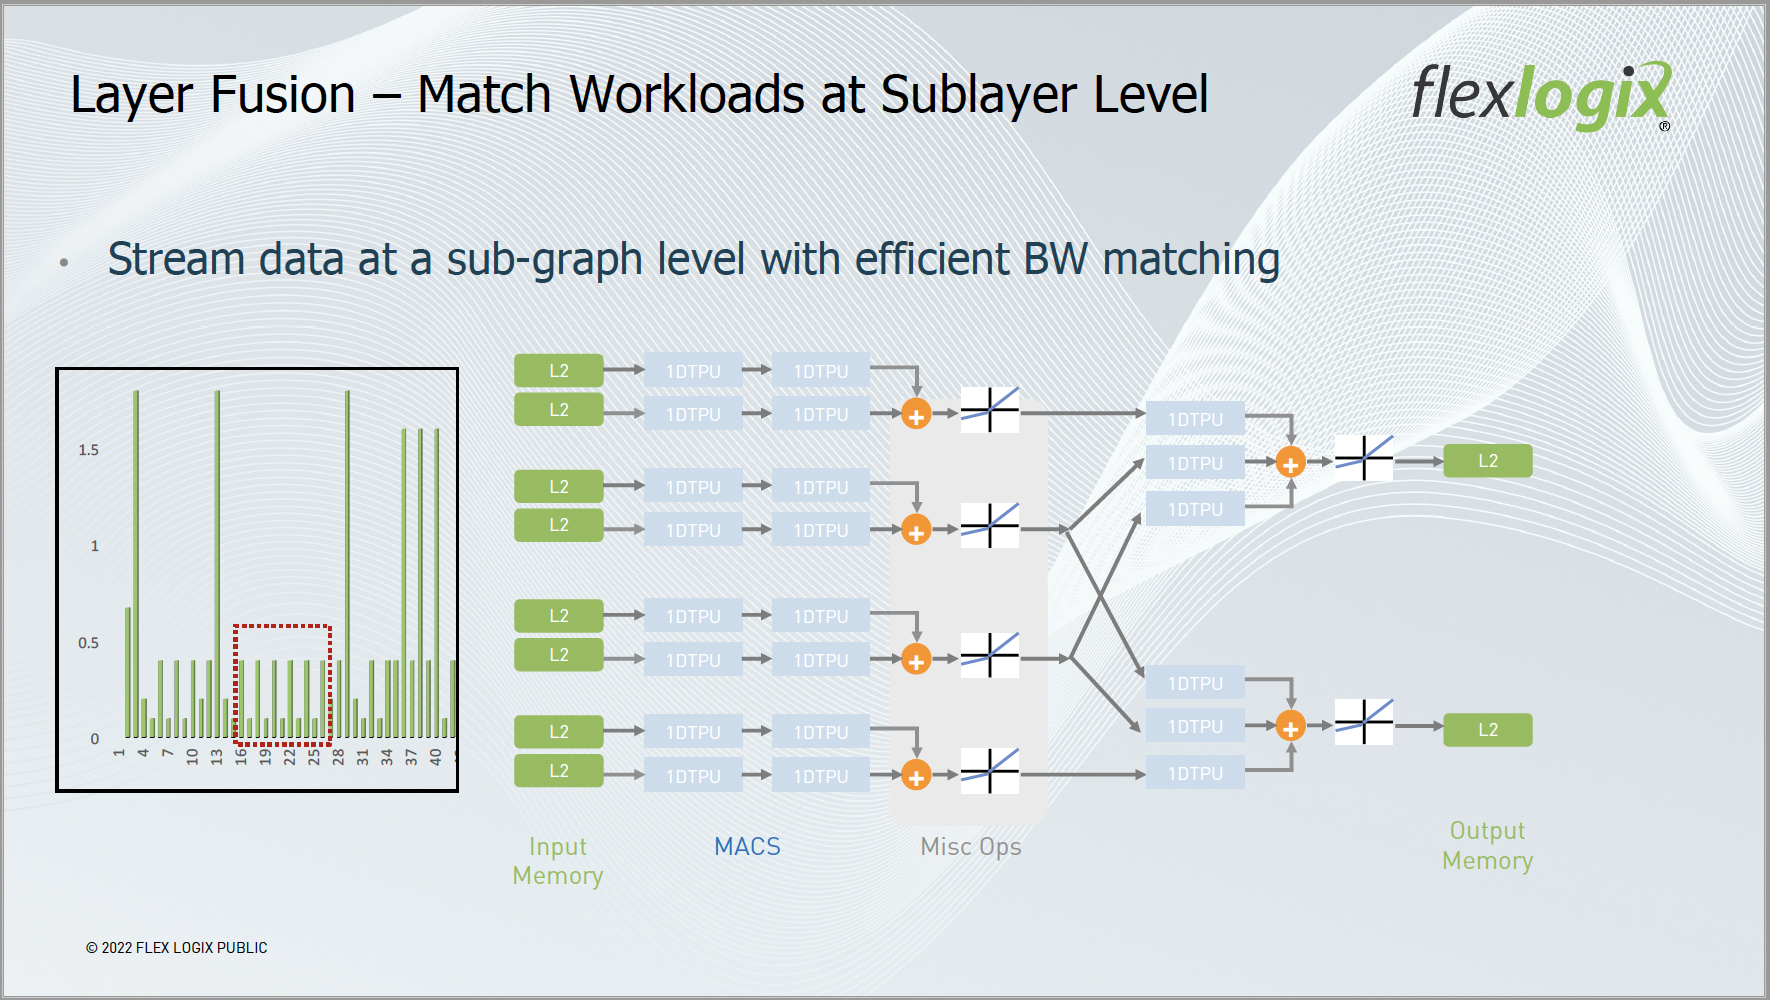 Layer Fusion Match Workloads at Sublayer Level